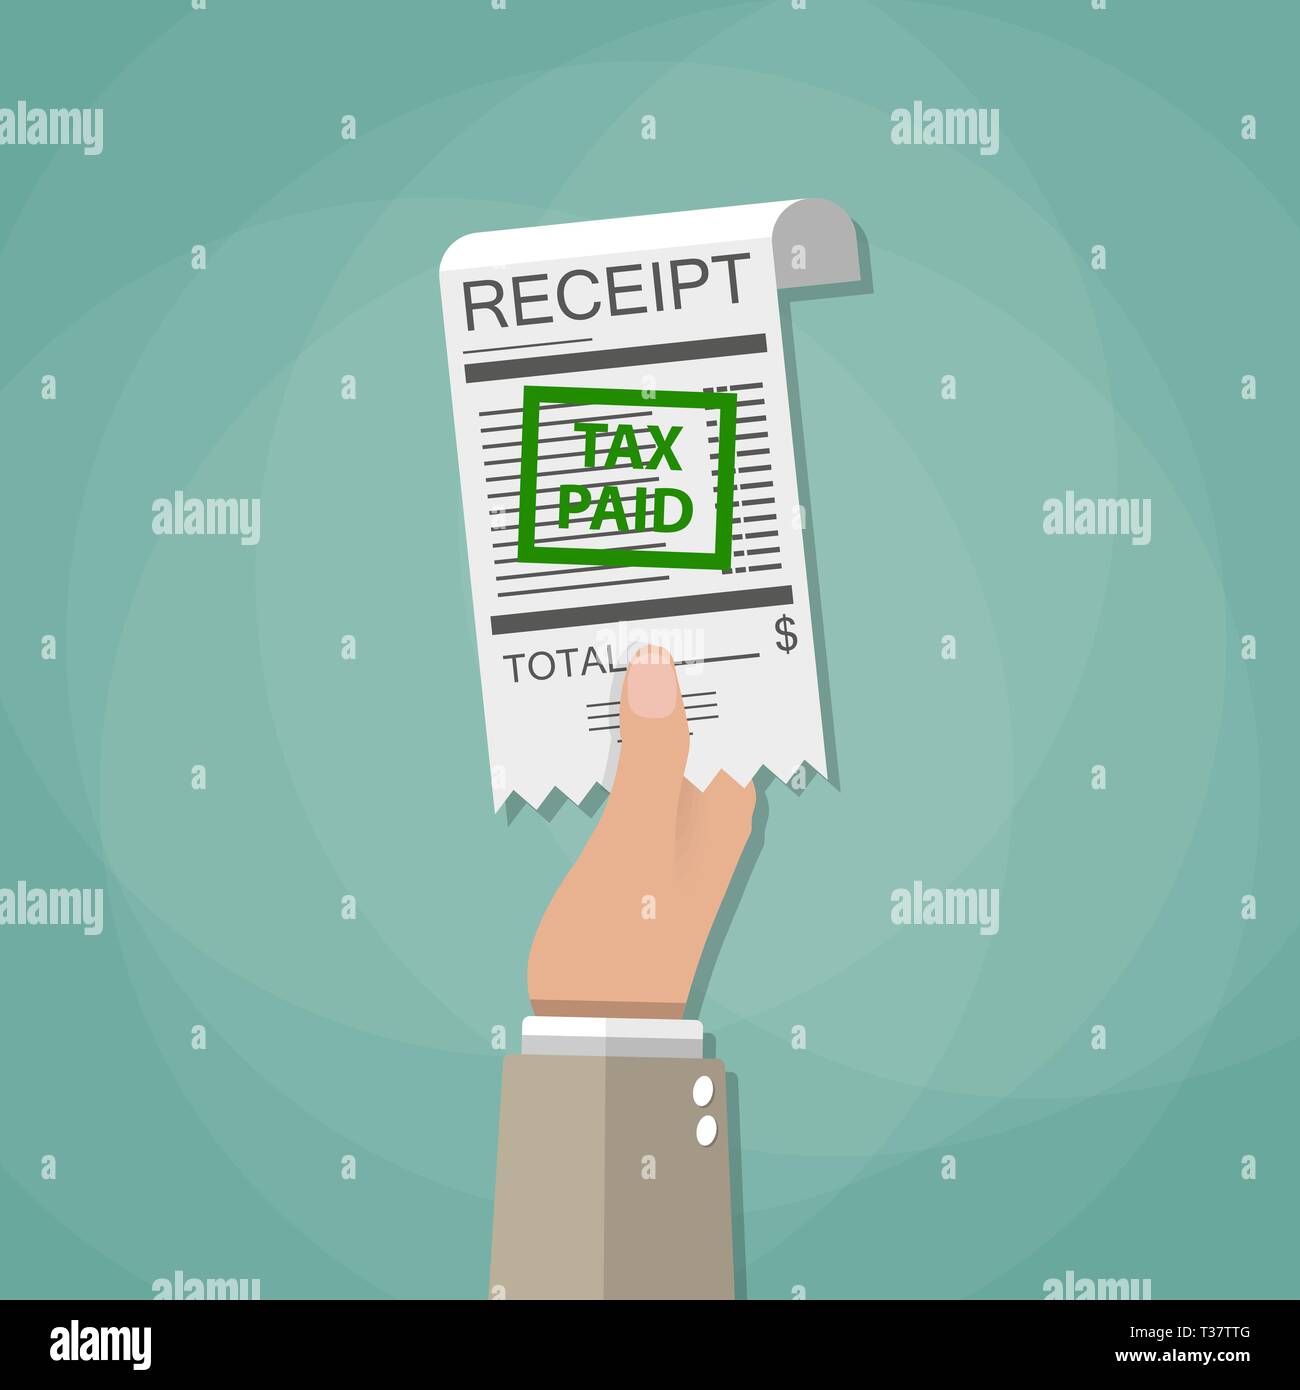 Hand holding receipt with green stamp tax paid. paying taxes concept. vector illustration in flat style on green background Stock Vector